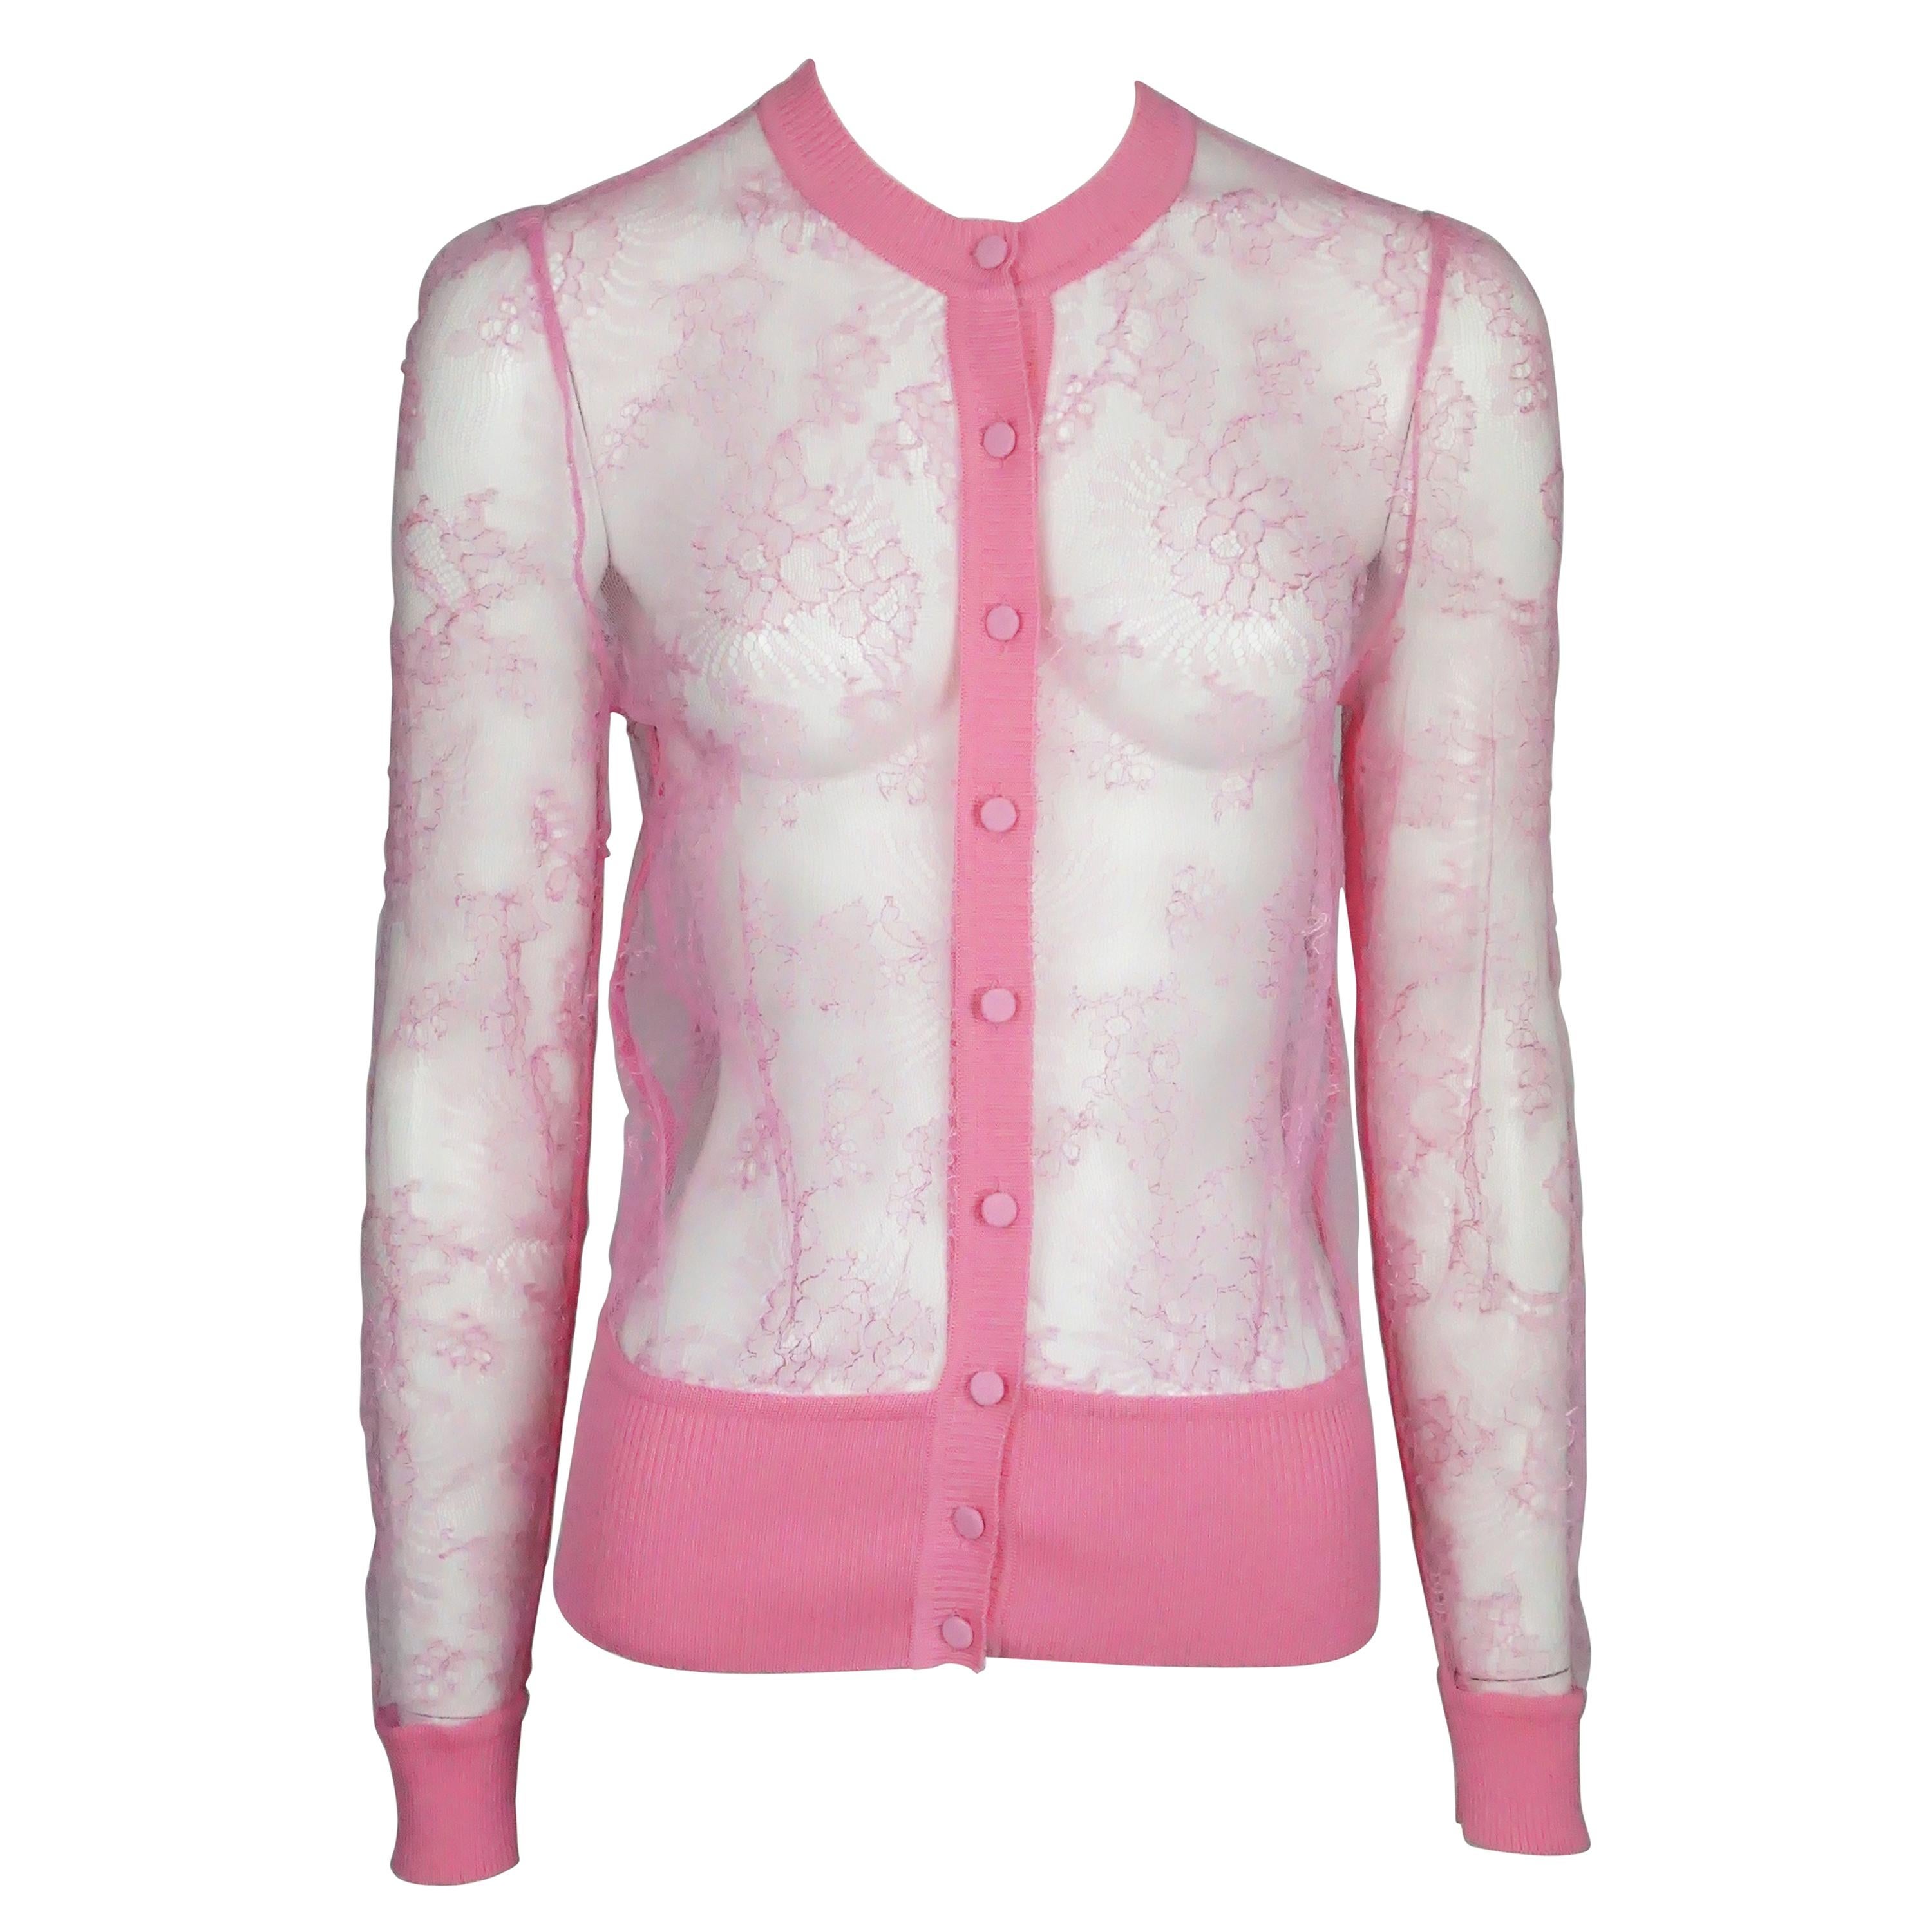 Valentino Neon Pink Lace Sheer w/ Cotton Trim Cardigan - Small